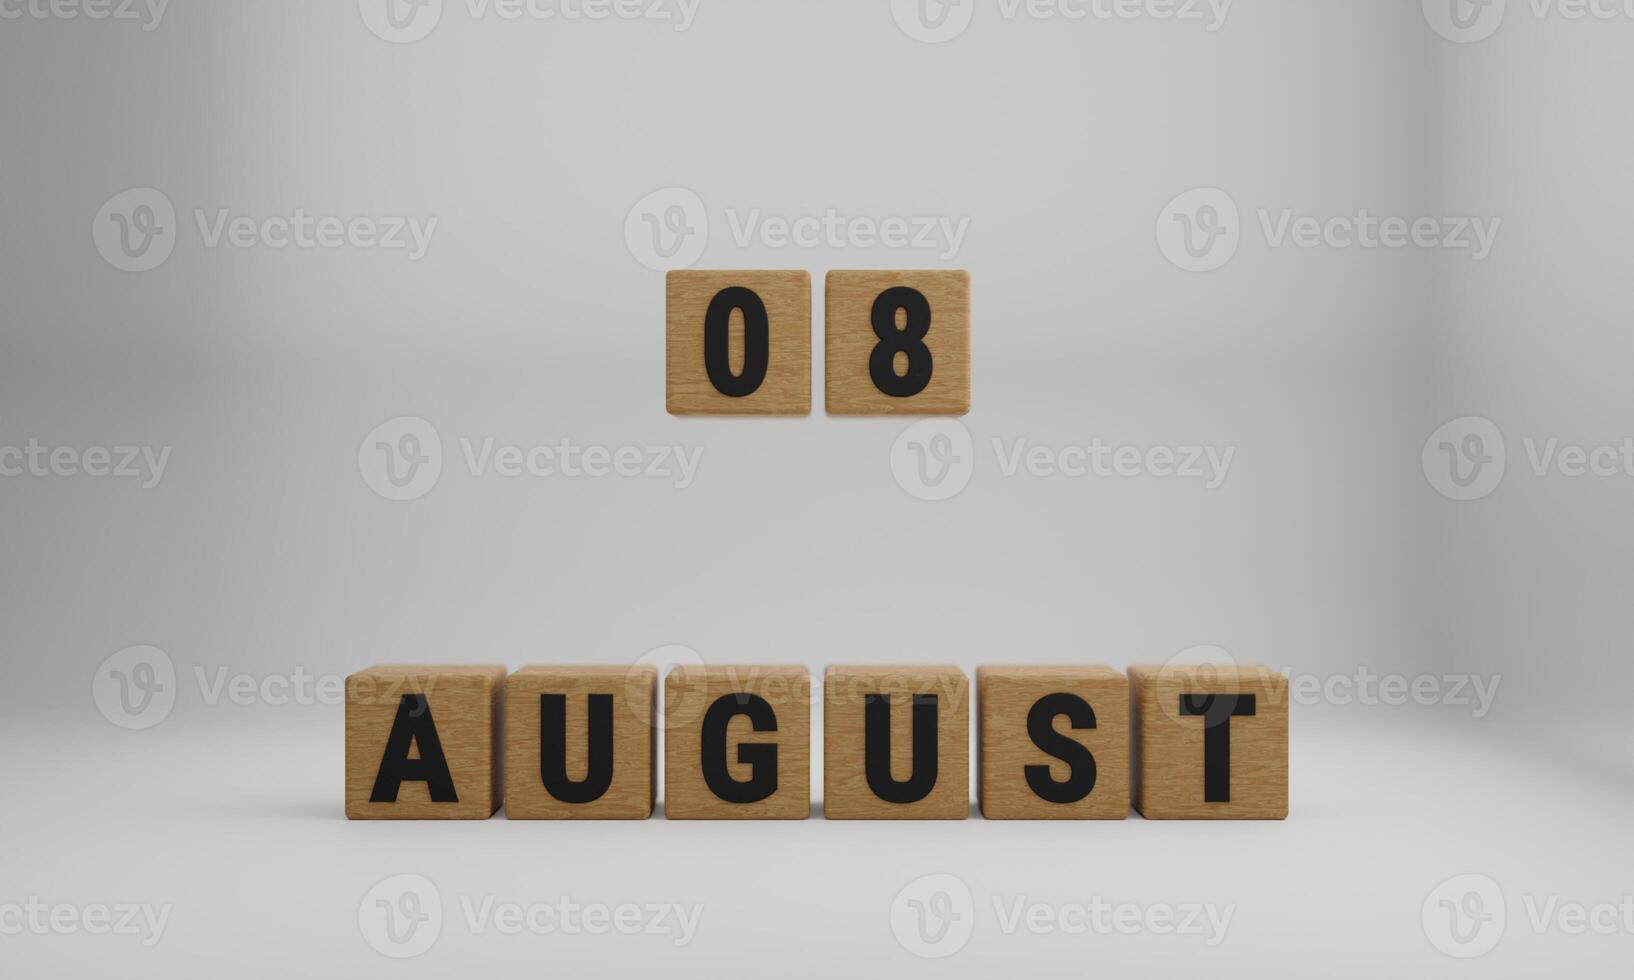 wooden cubes with arranged letters. August and 08 on blurry white background photo